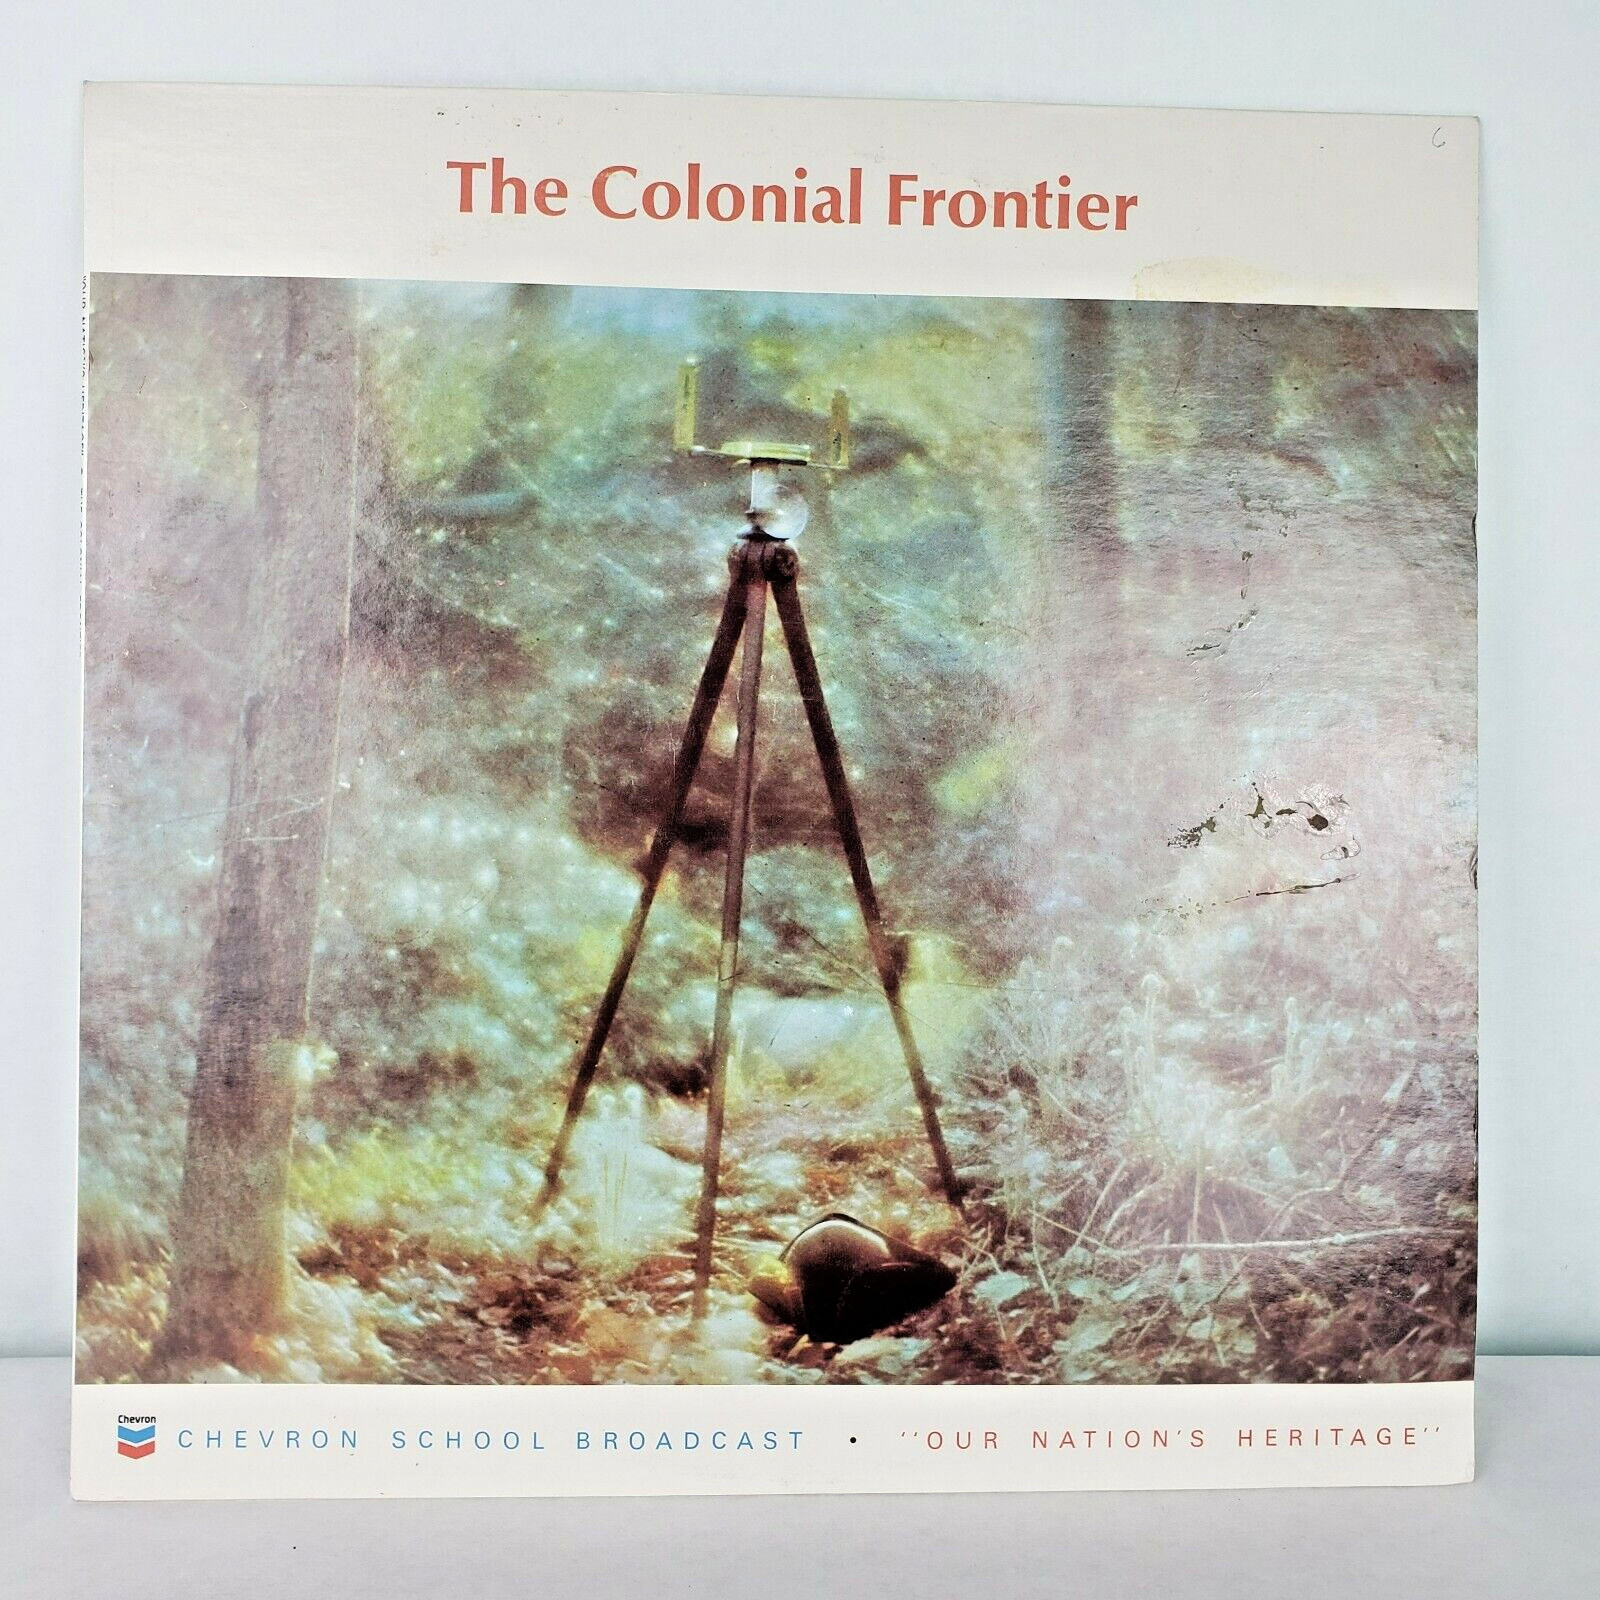 Vtg Chevron School Broadcast The Colonial Frontier LP Our Nations Heritage 1972